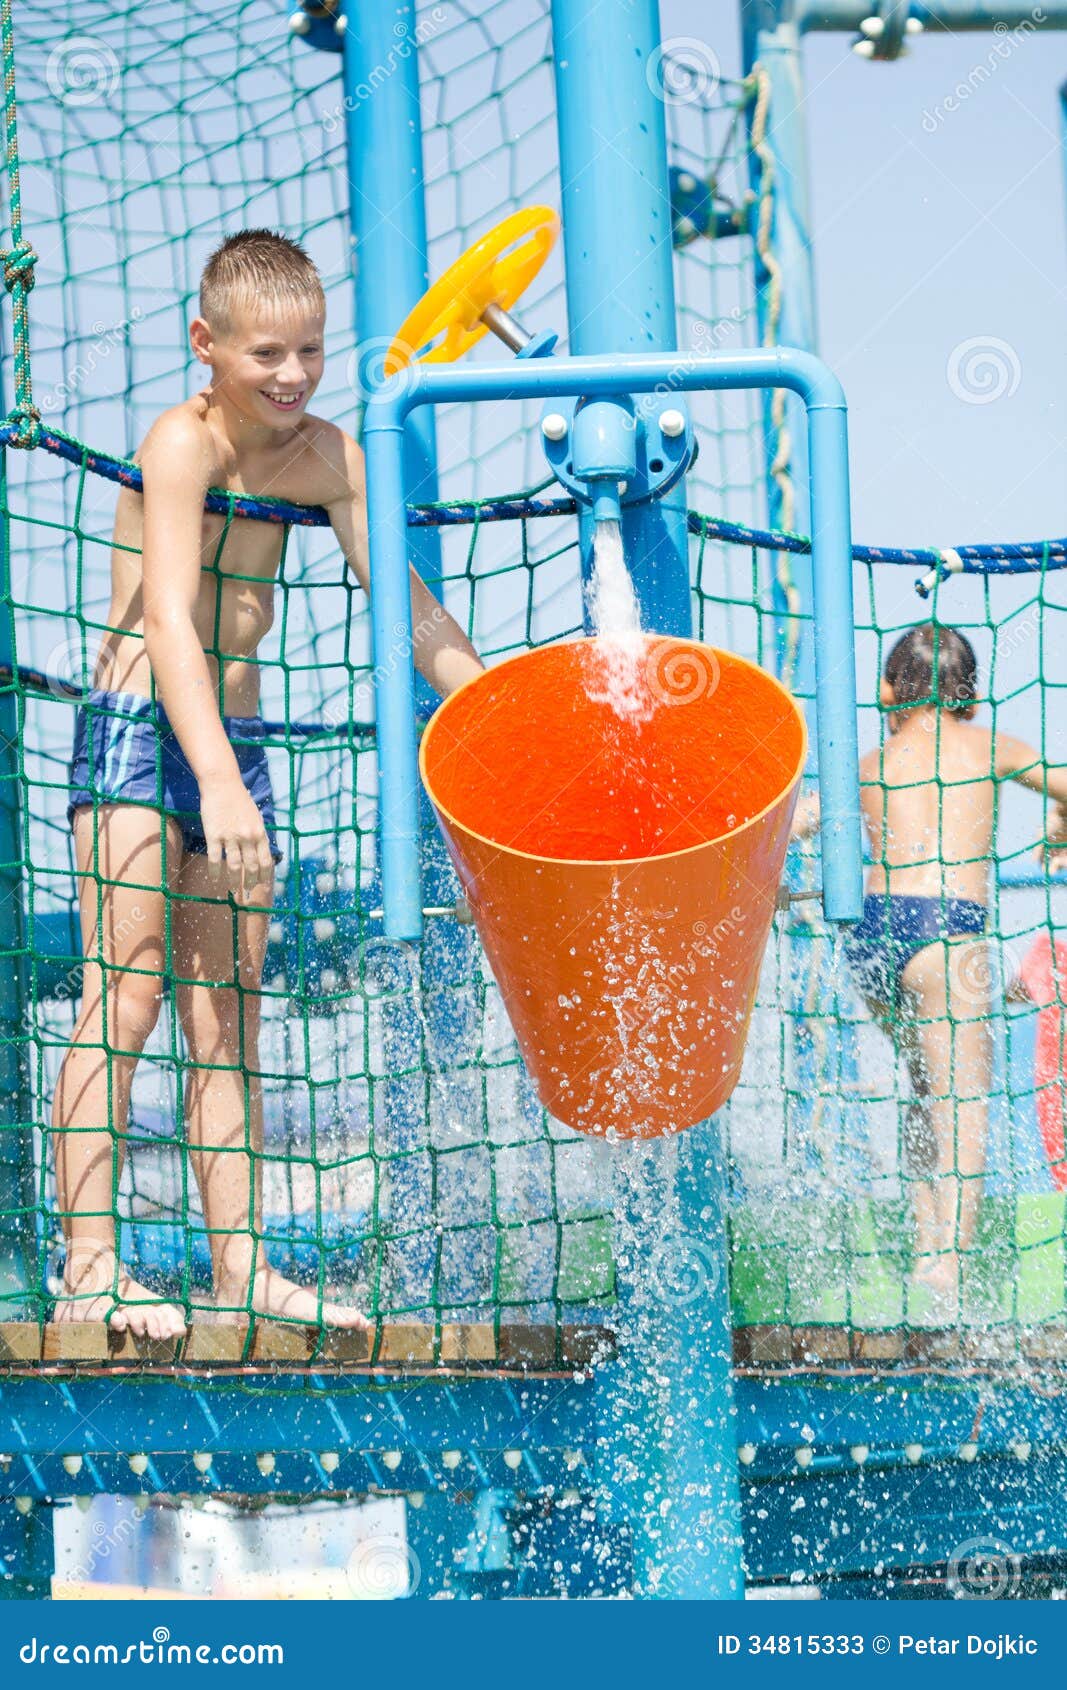 Two boys at water park in summer playing on slide near 